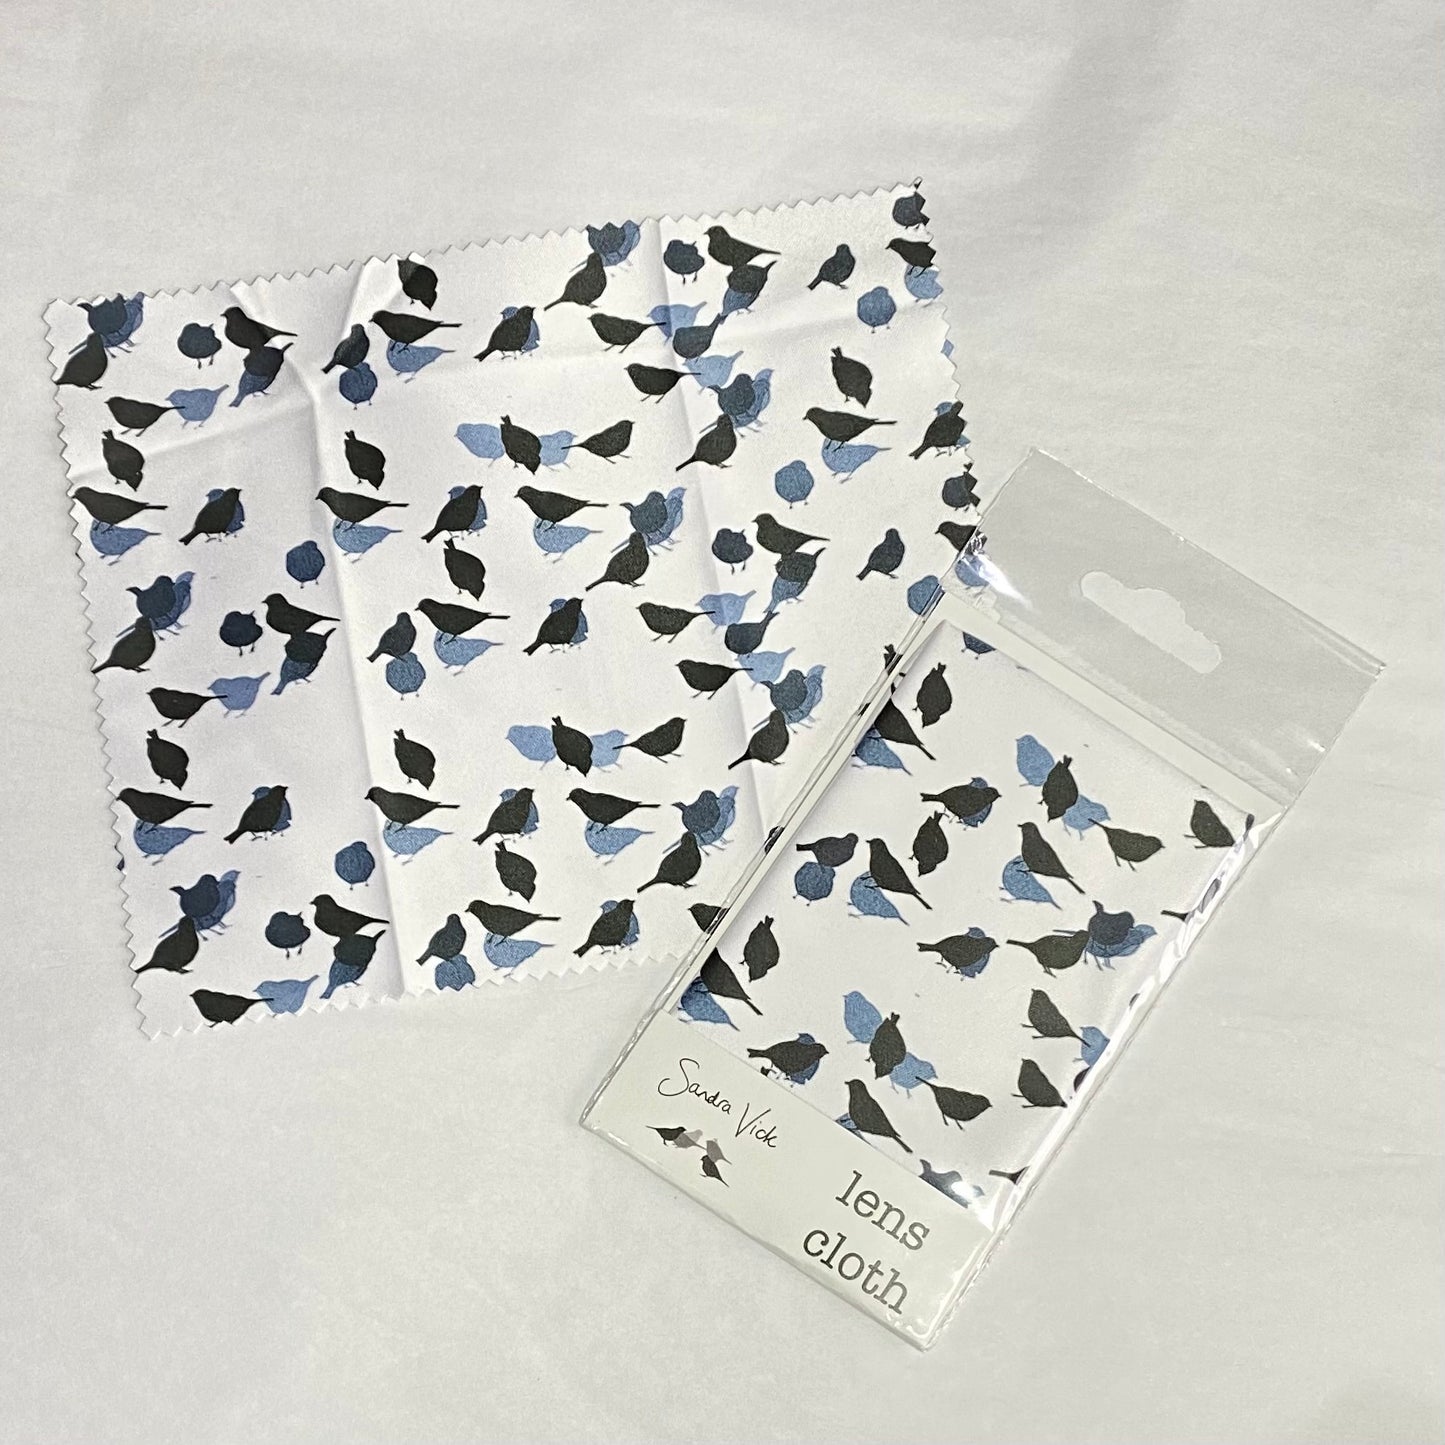 LENS CLOTH: chaffinches